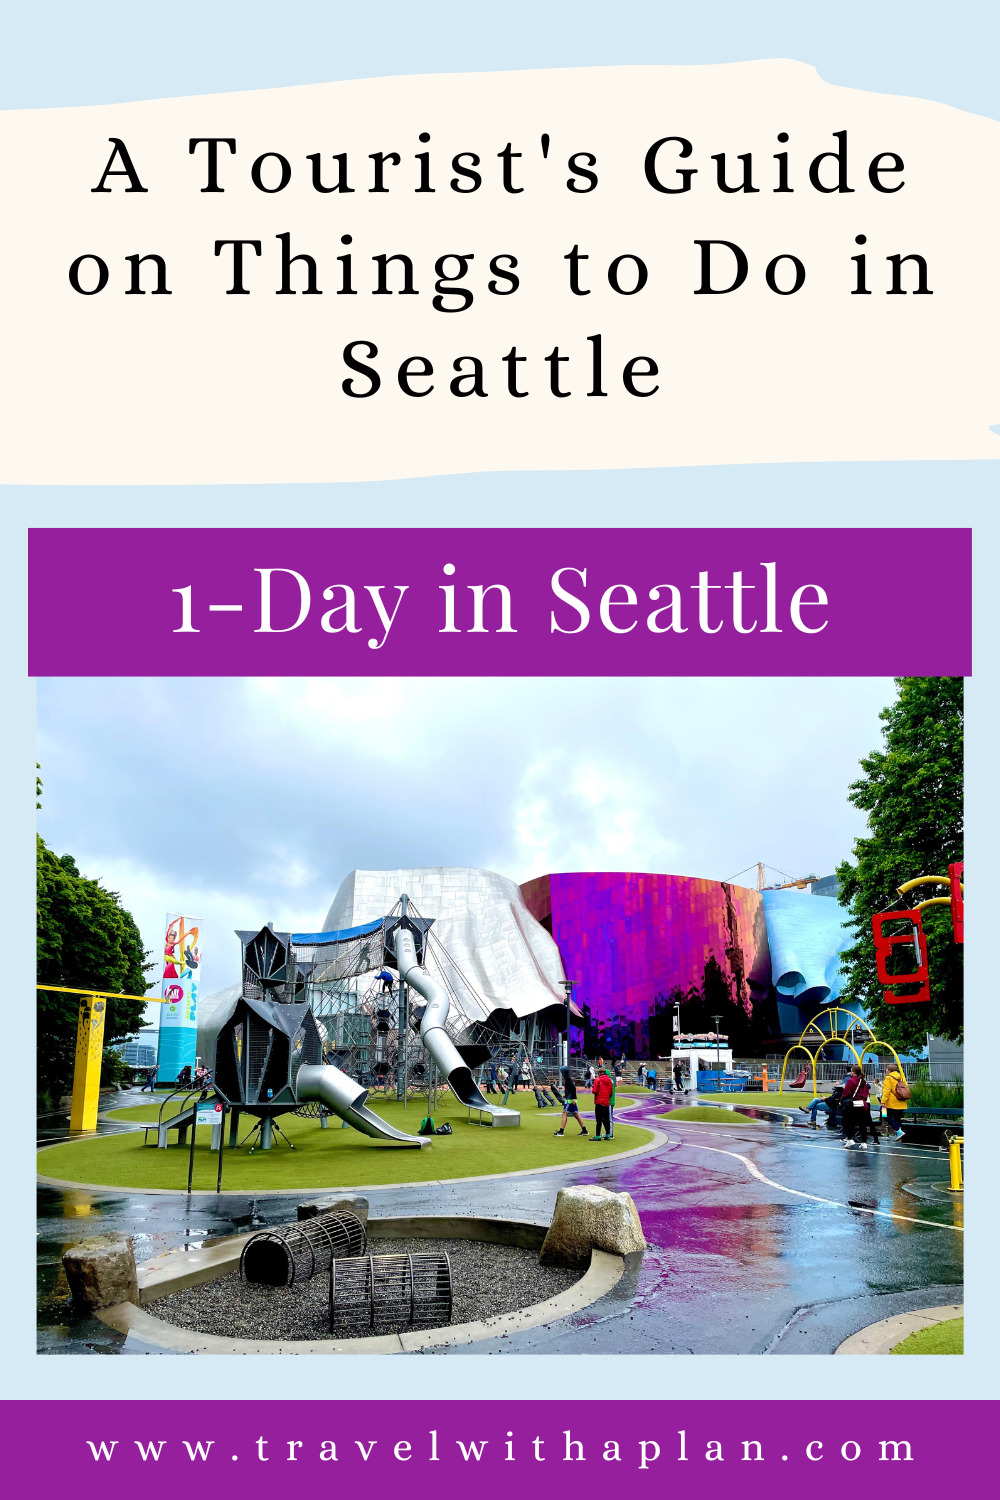 Here's how to spend 1-day in Seattle before a cruise!